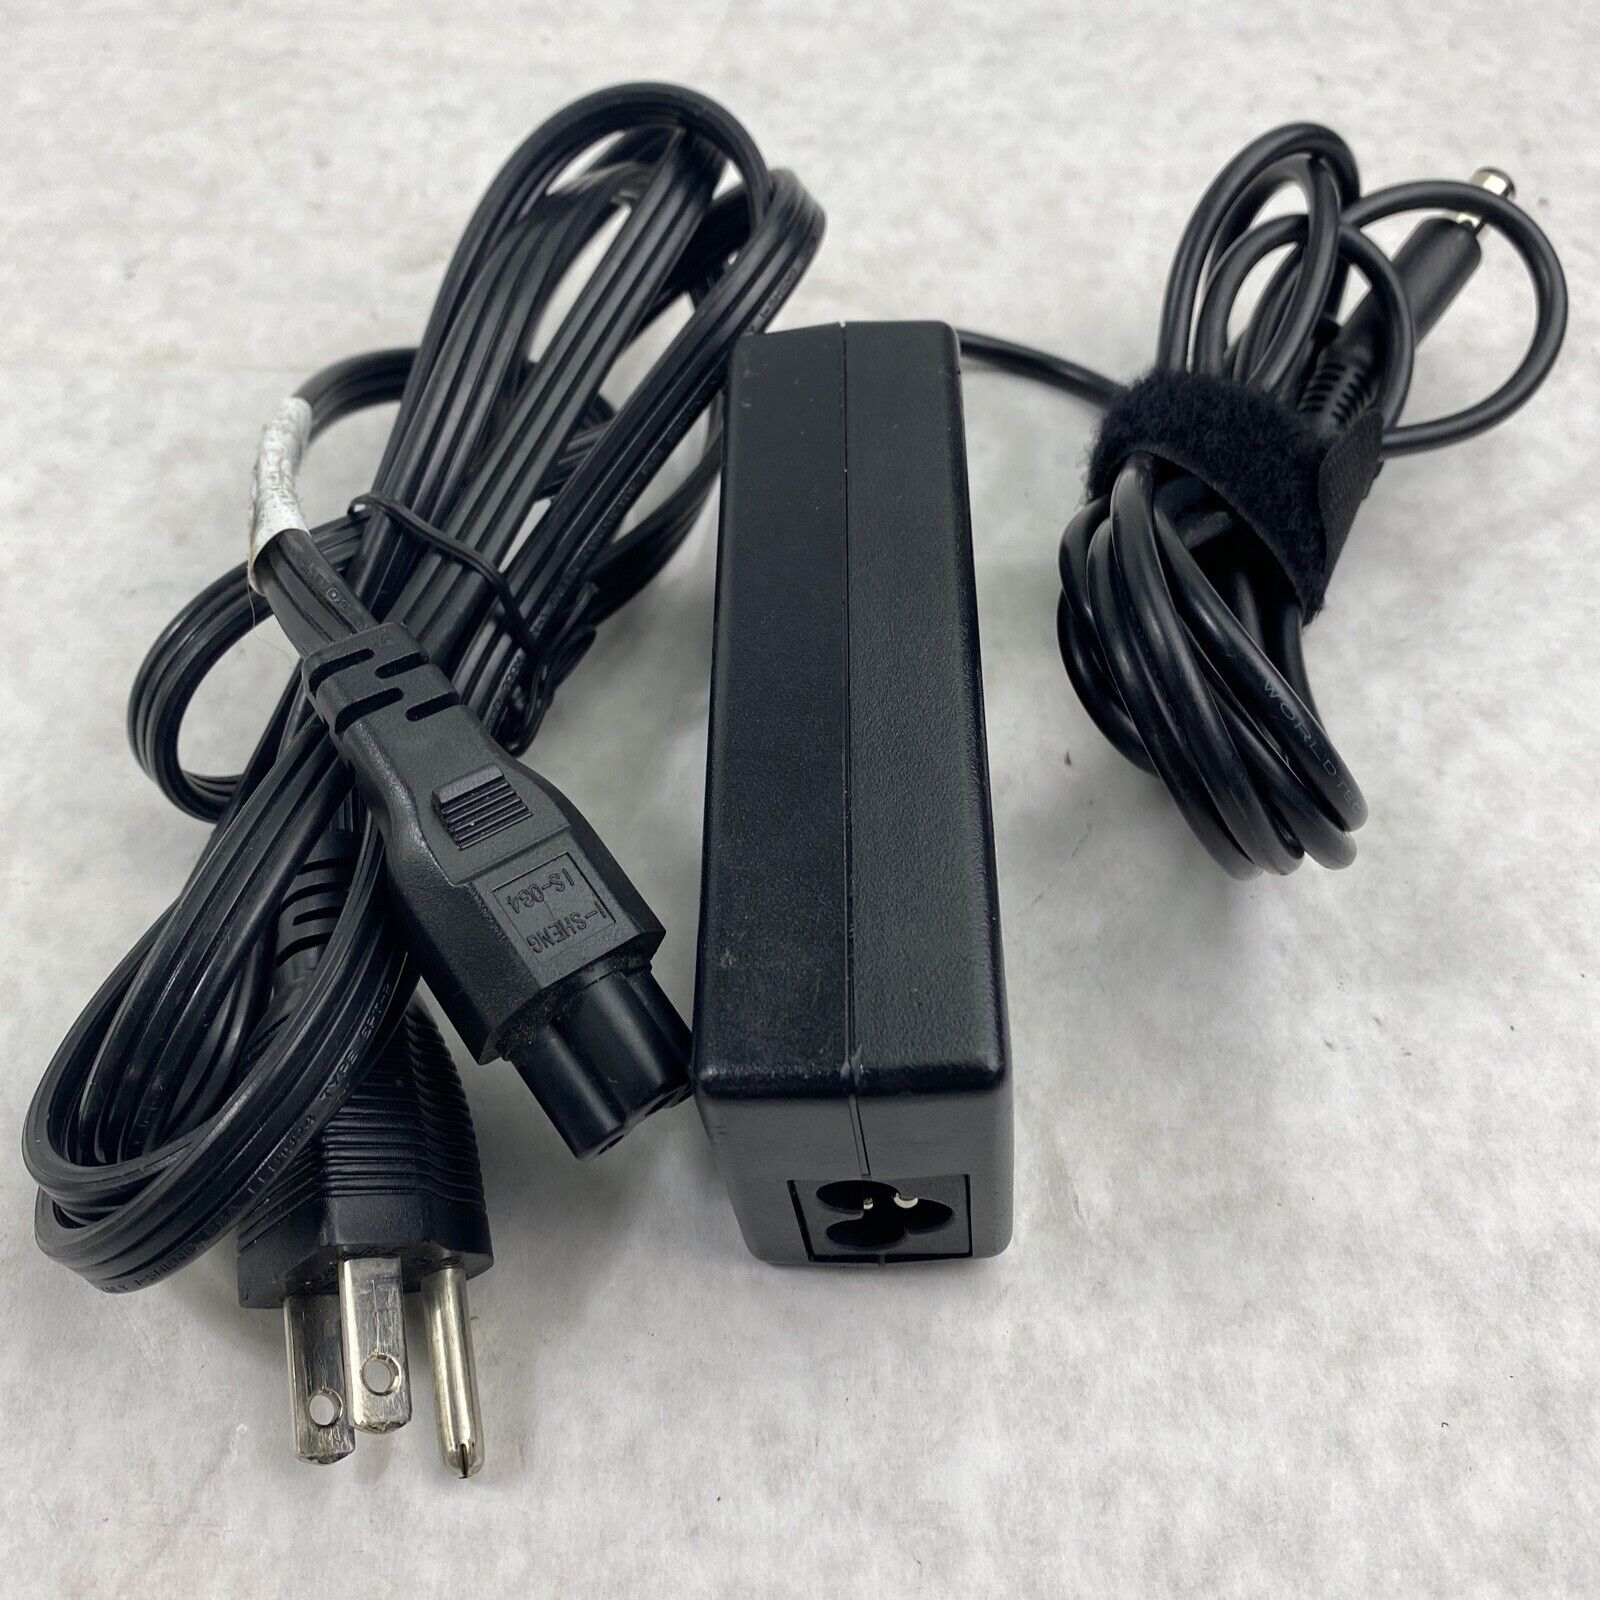 Laptop Chargers, International Laptop Charger